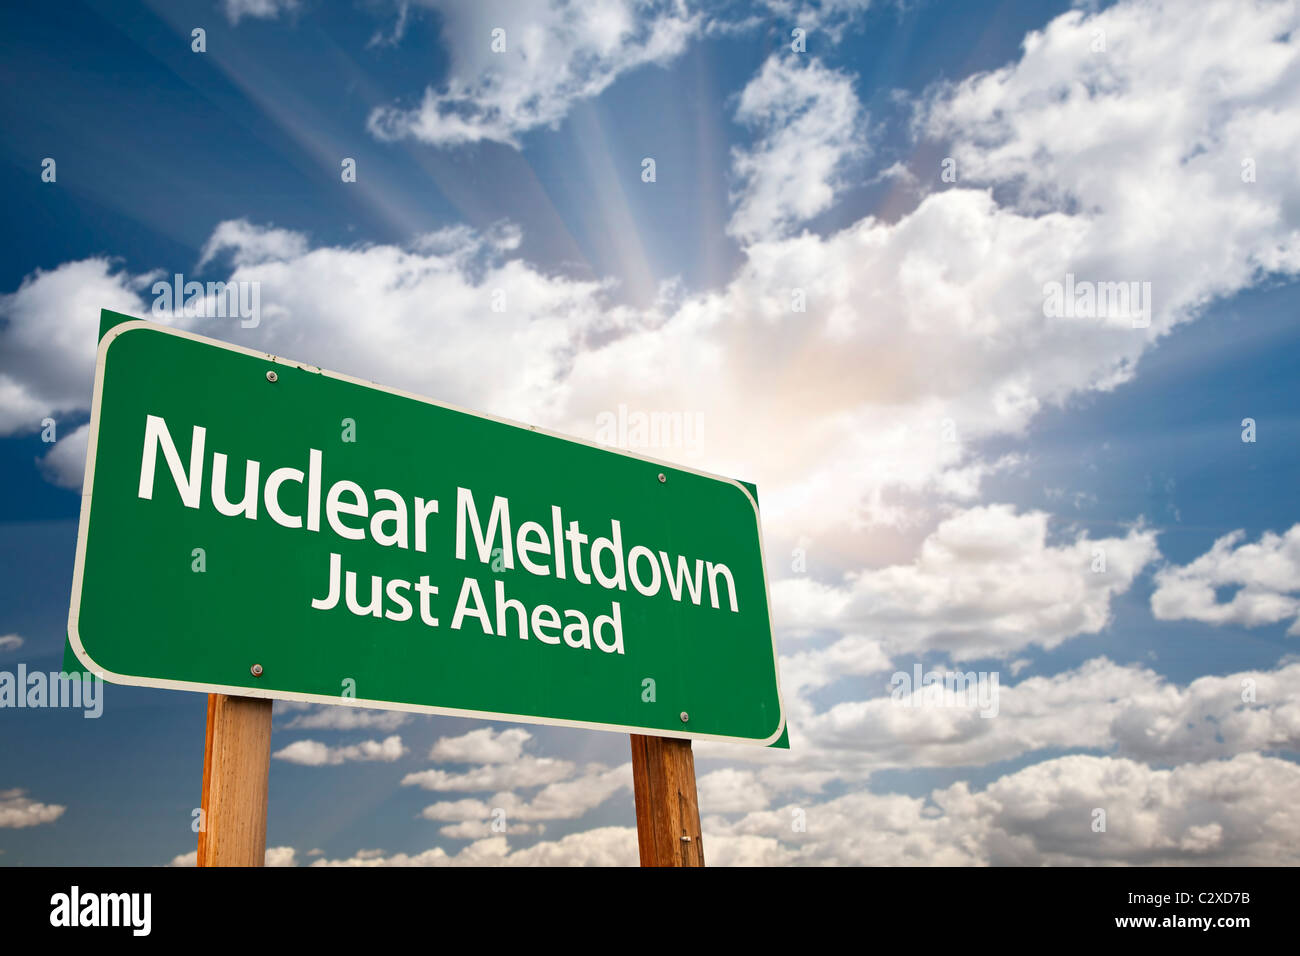 Nuclear Meltdown Green Road Sign with Dramatic Clouds, Sun Rays and Sky. Stock Photo